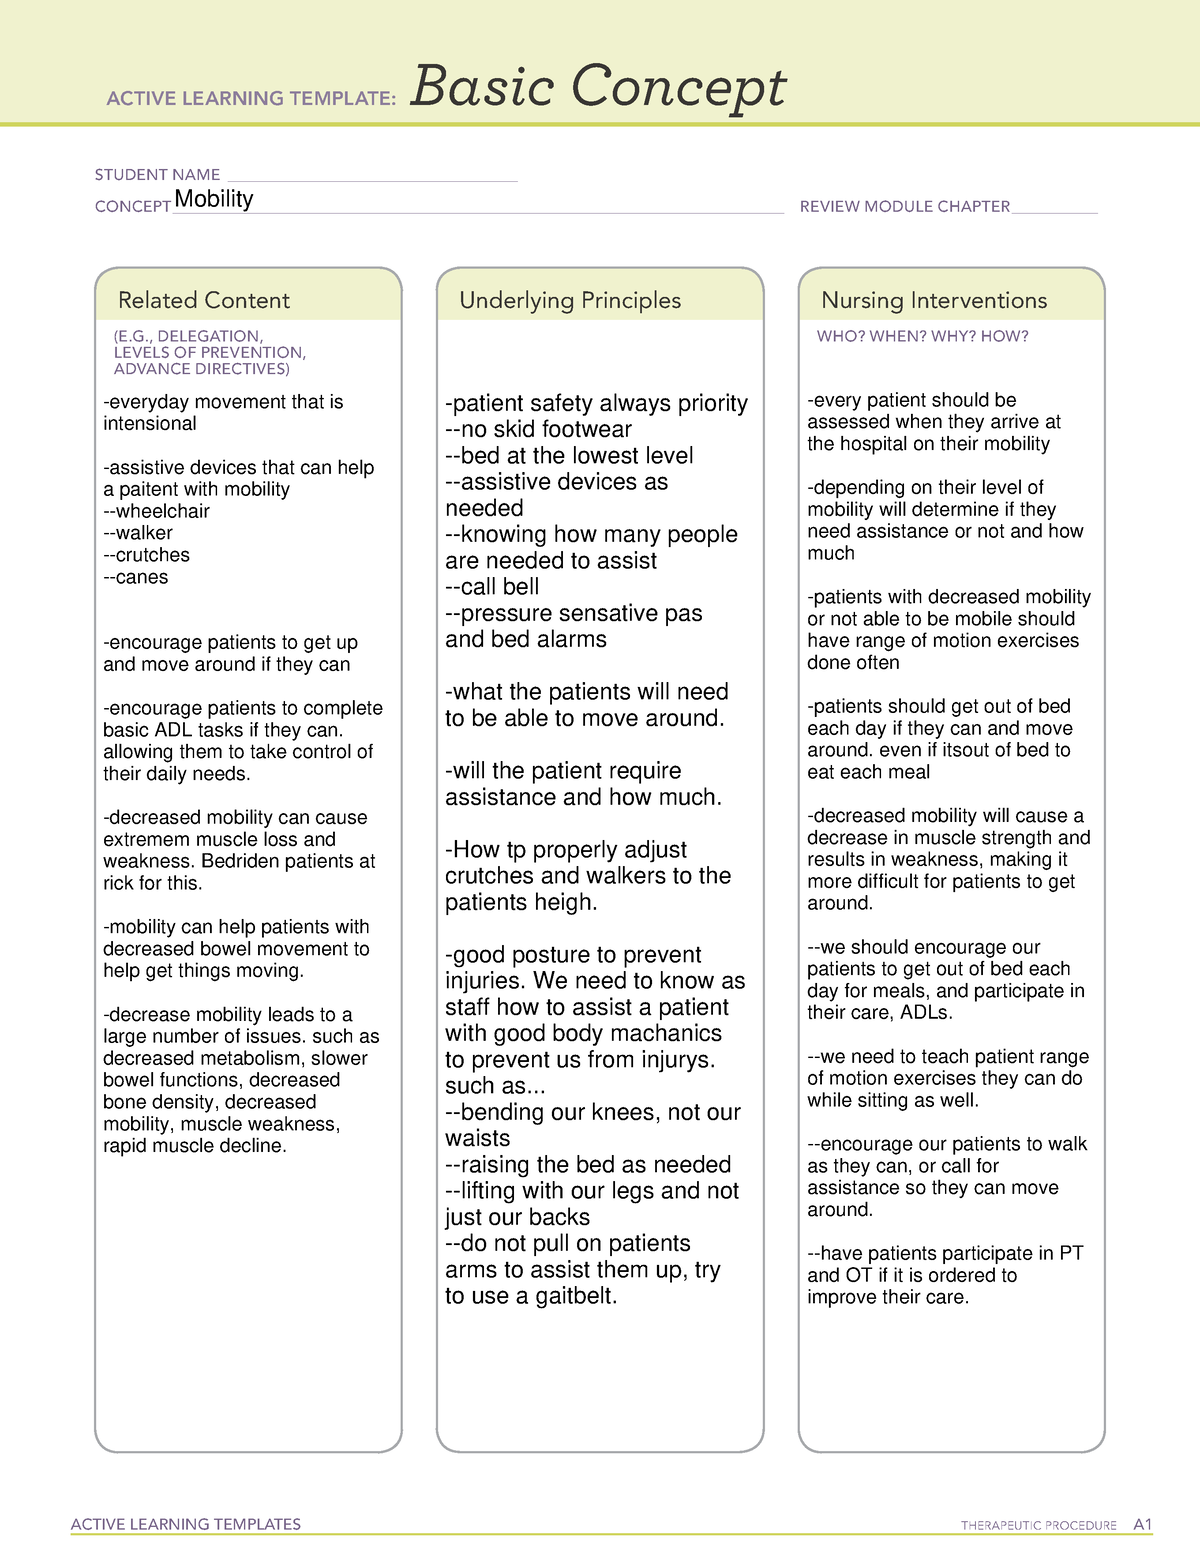 ati-active-learning-template-basic-concept